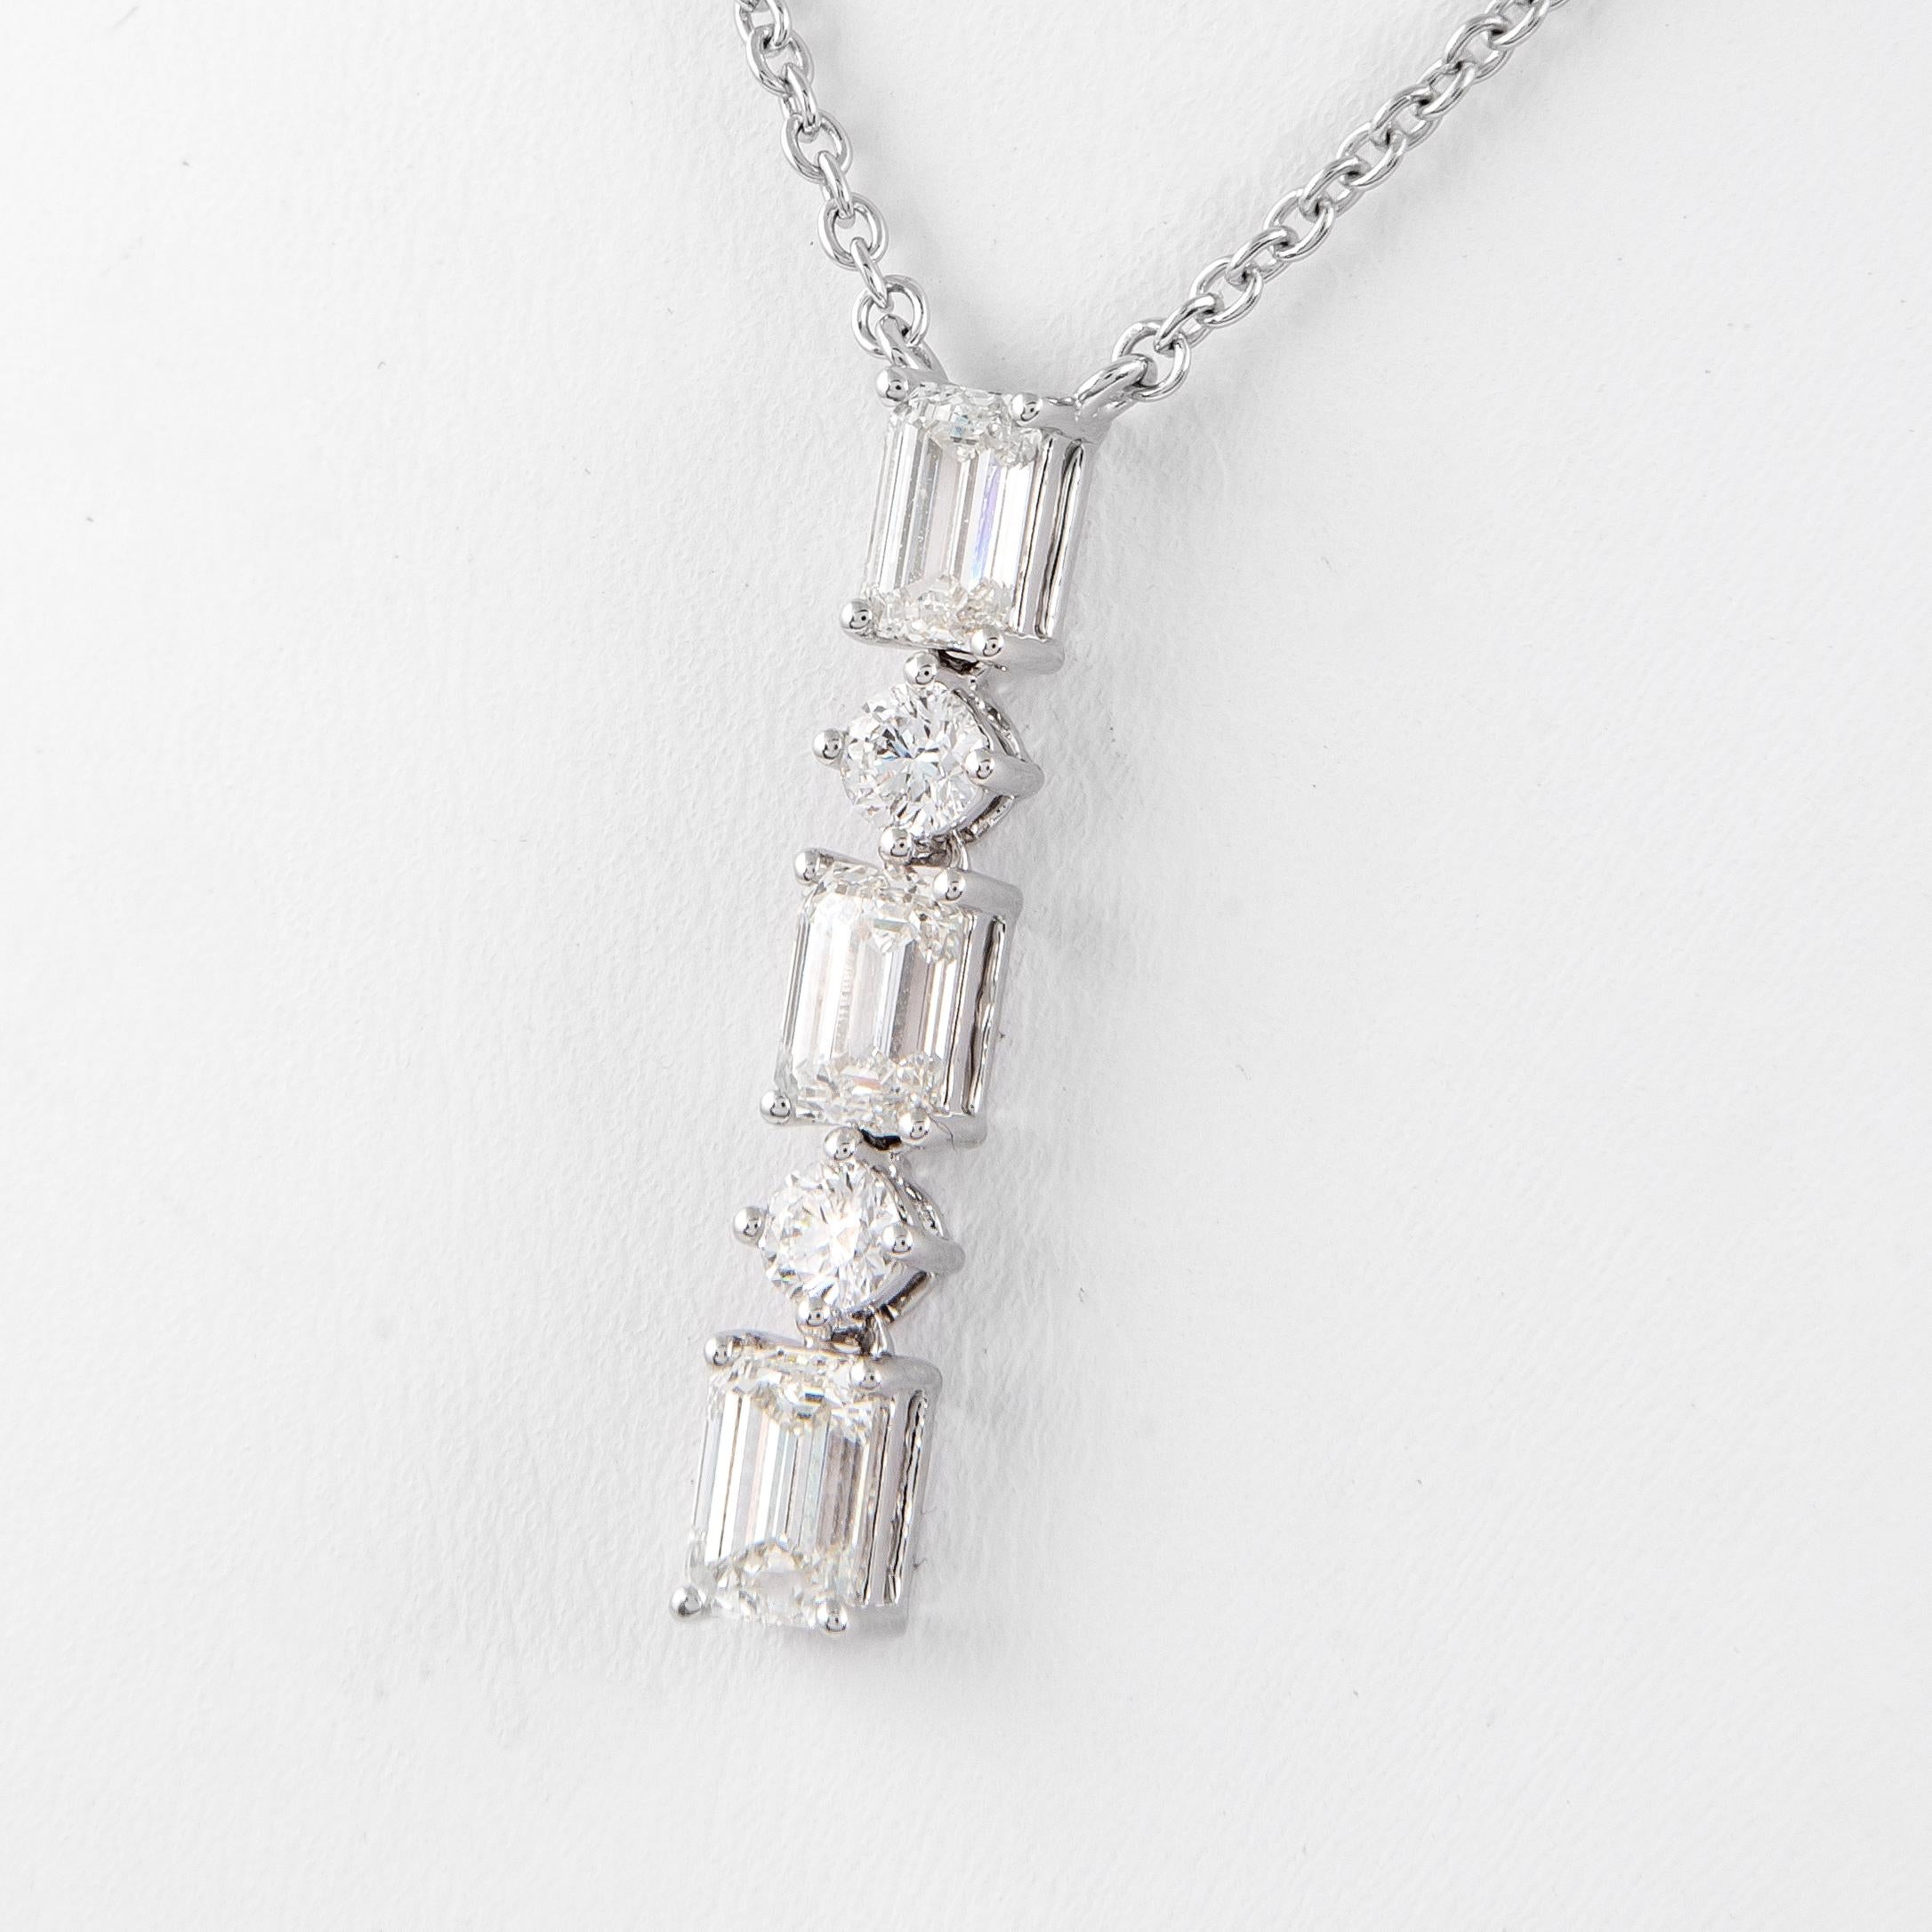 Stunning dangling pendant necklace, GIA certified. By Alexander Beverly Hills.
3 emerald cut diamonds, GIA certified, I-J color, VVS1-VS1 clarity, 1.13ct. Complimented by 2 round brilliant diamonds, 0.30ct. Approximately E/F color and VS clarity.